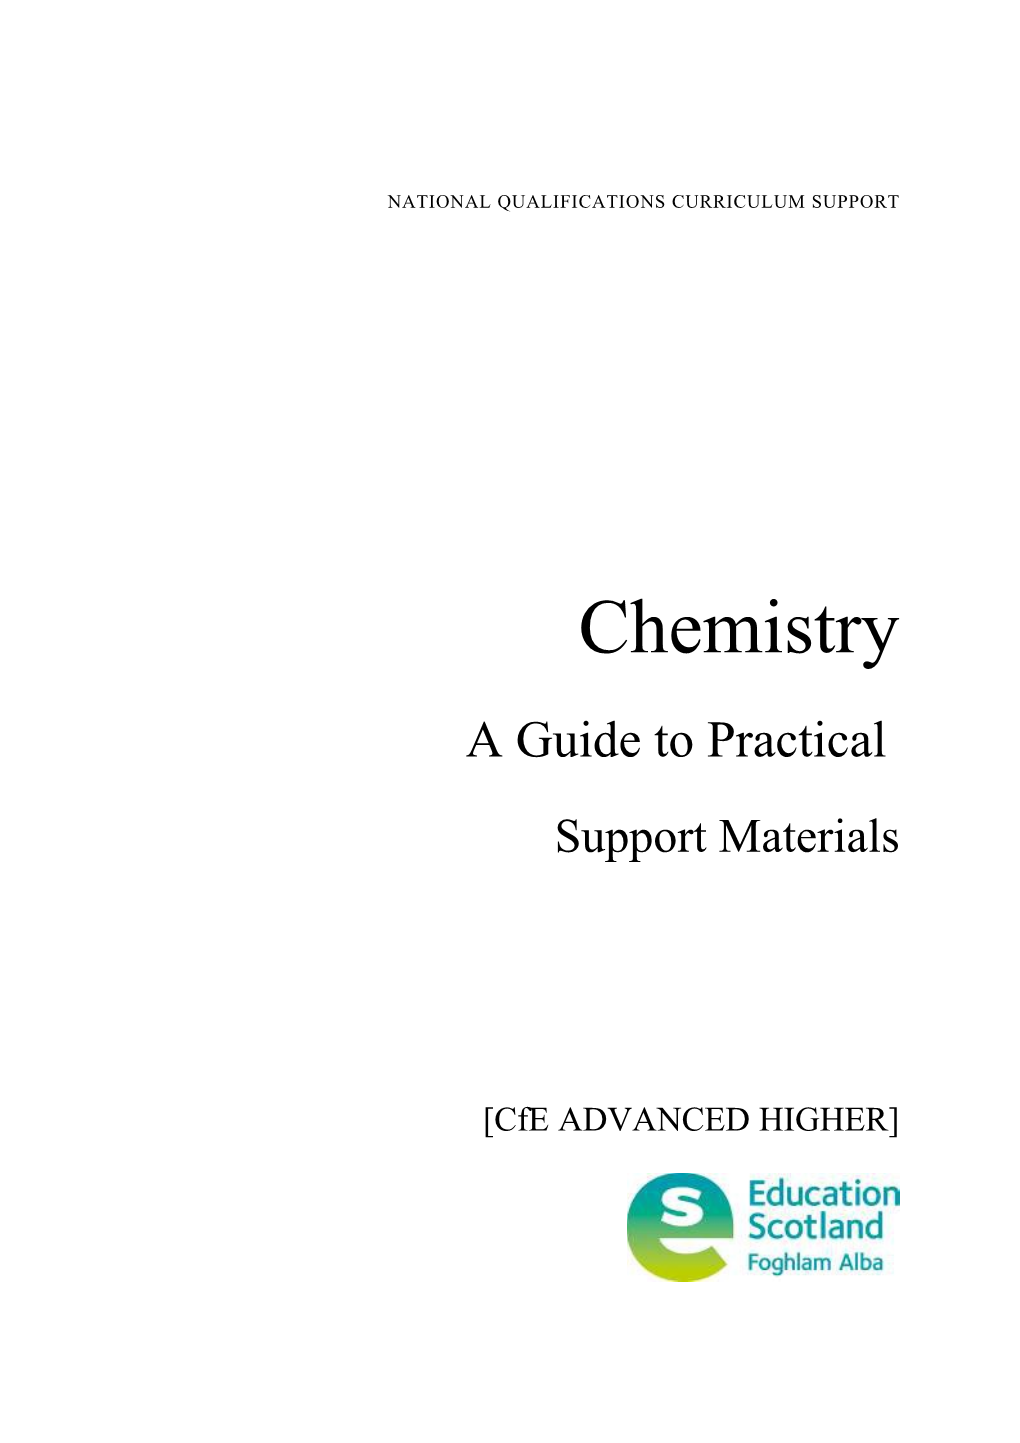 Chemistry - a Practical Guide - Support Materials